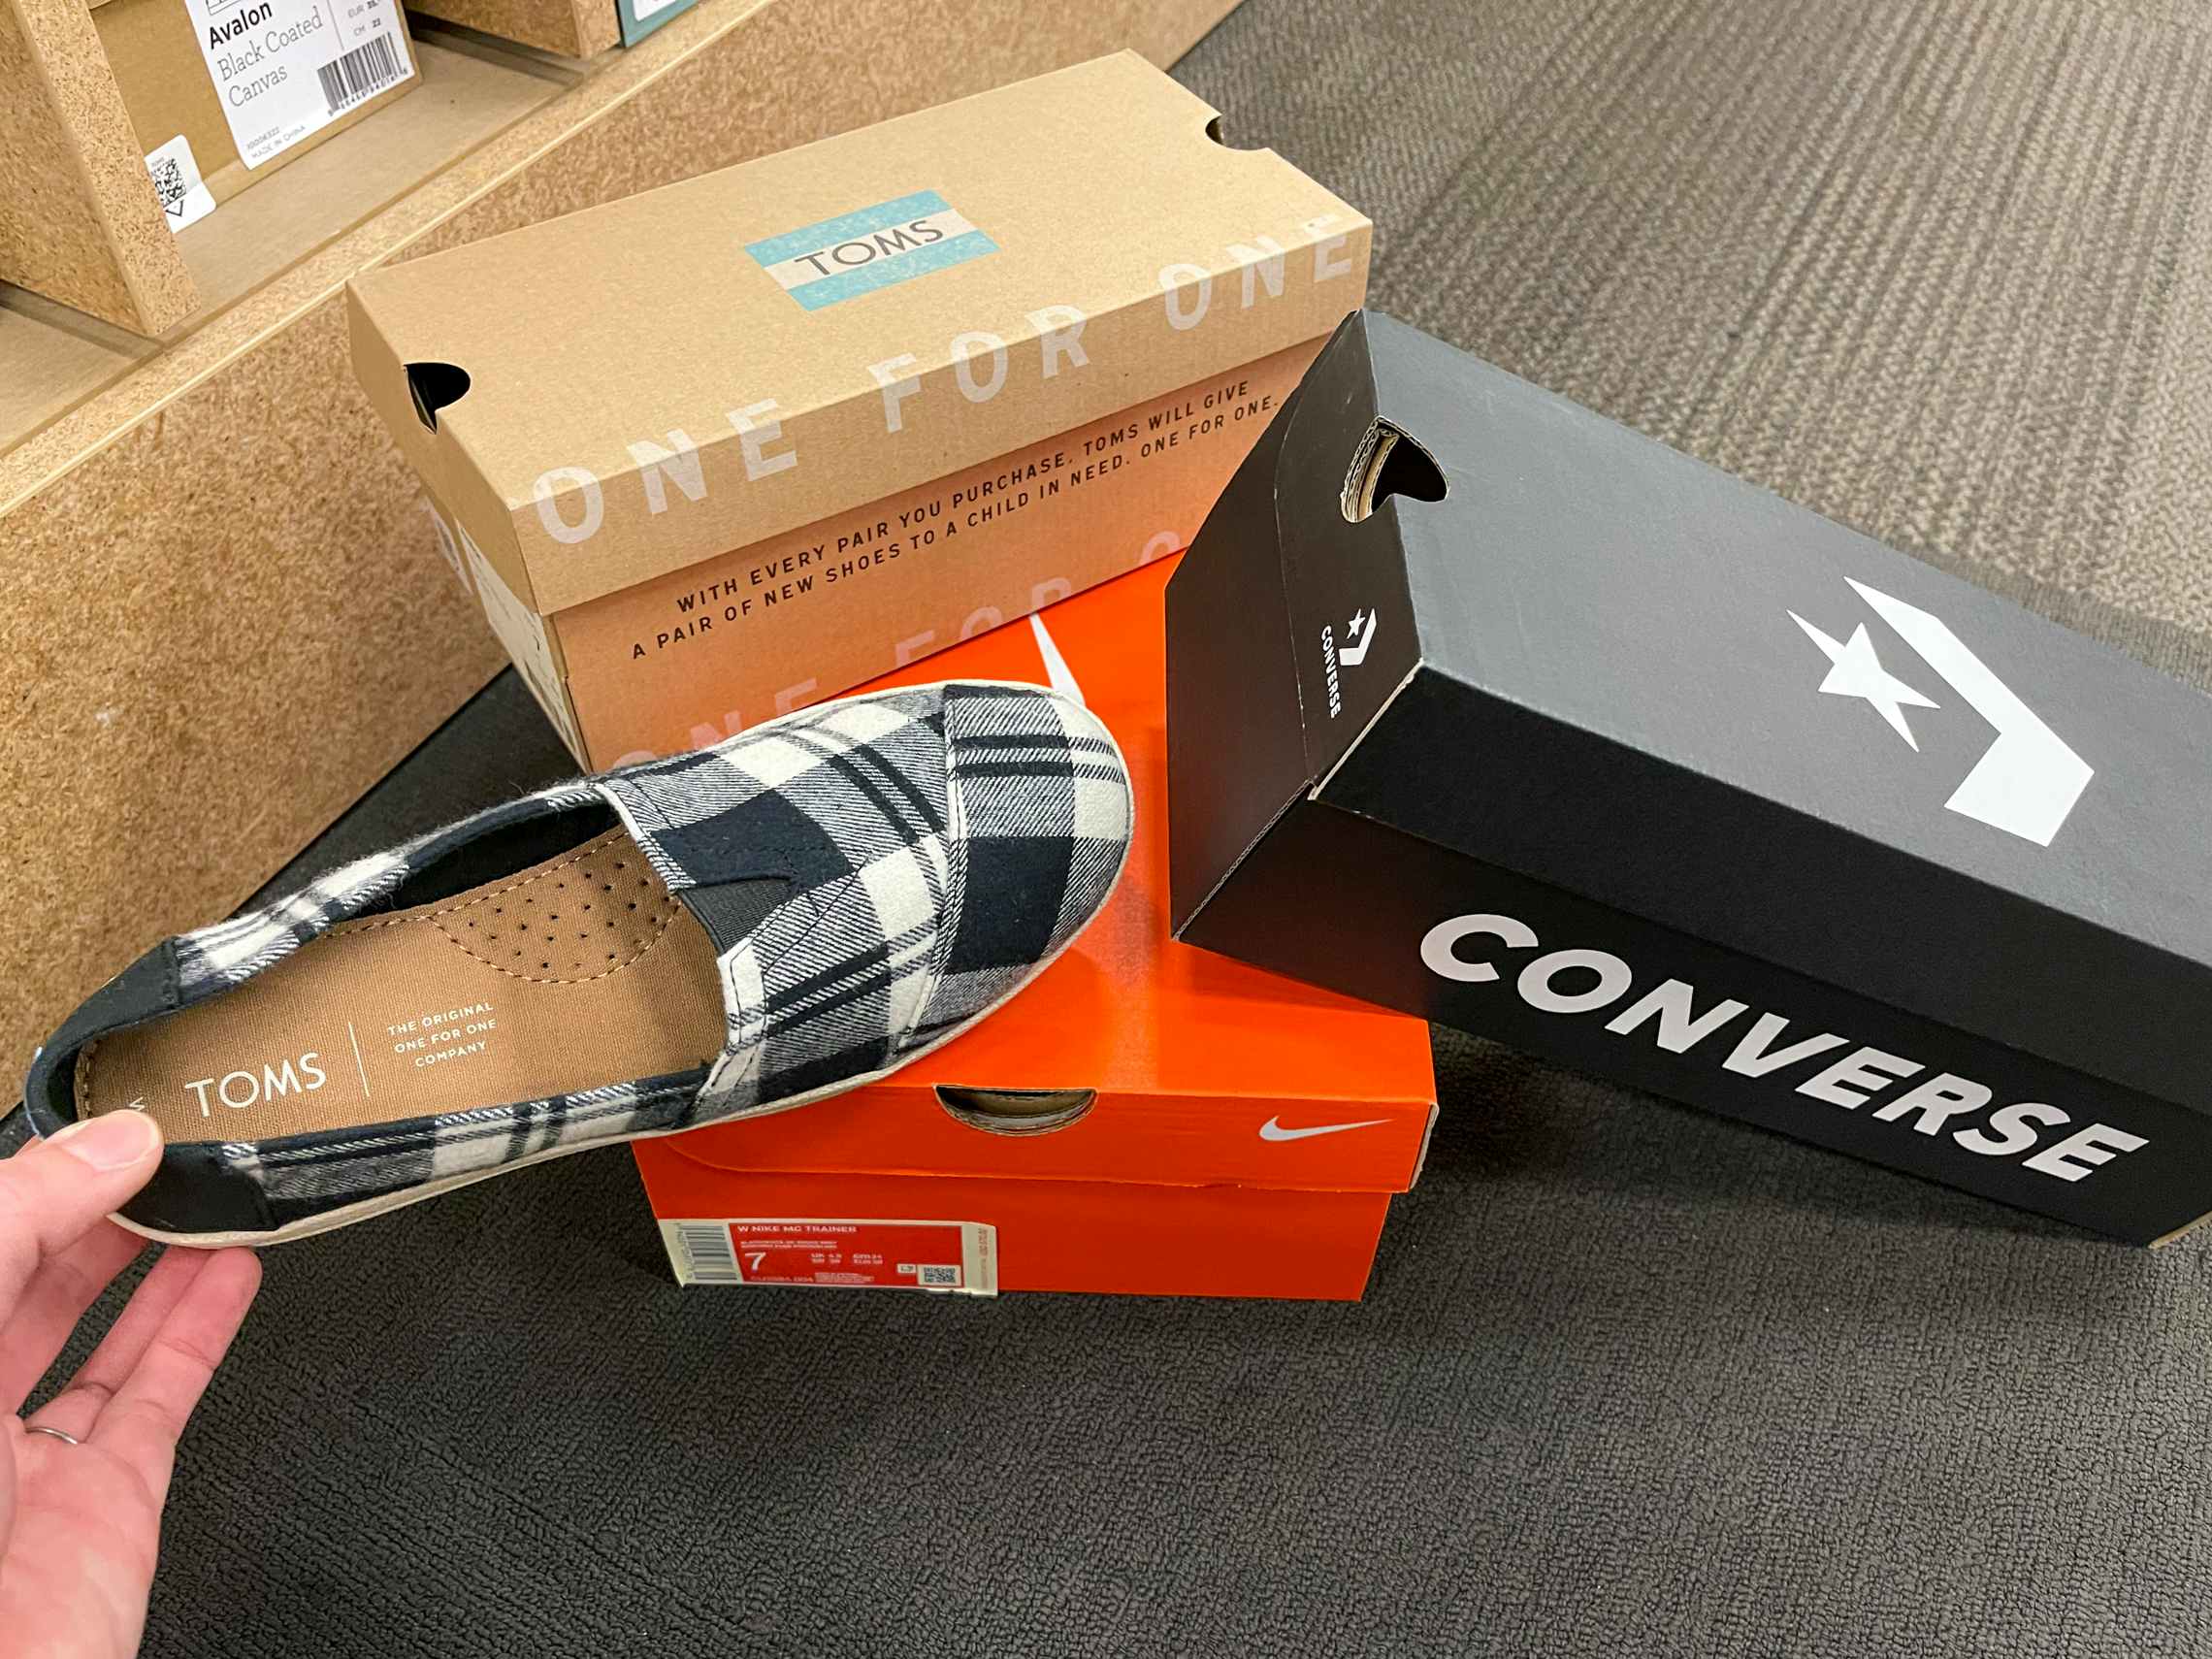 Converse, Nike, and TOMS shoe boxes stacked up on the floor with a person holding one of the TOMS shoes next to the boxes.